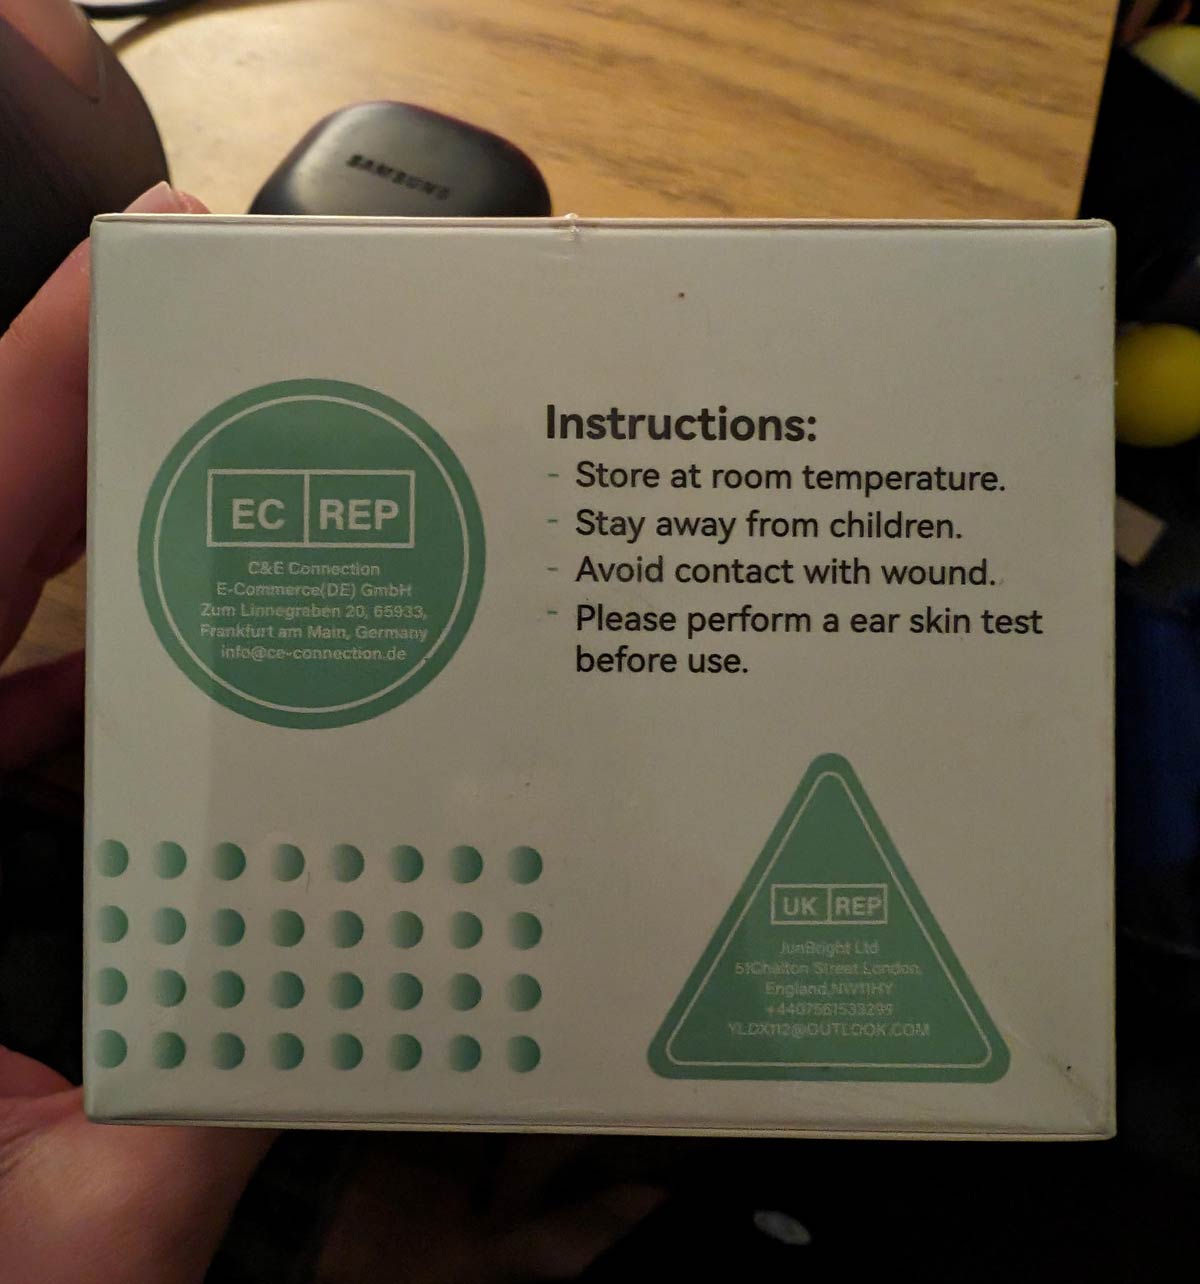 The second instruction on this skin cream